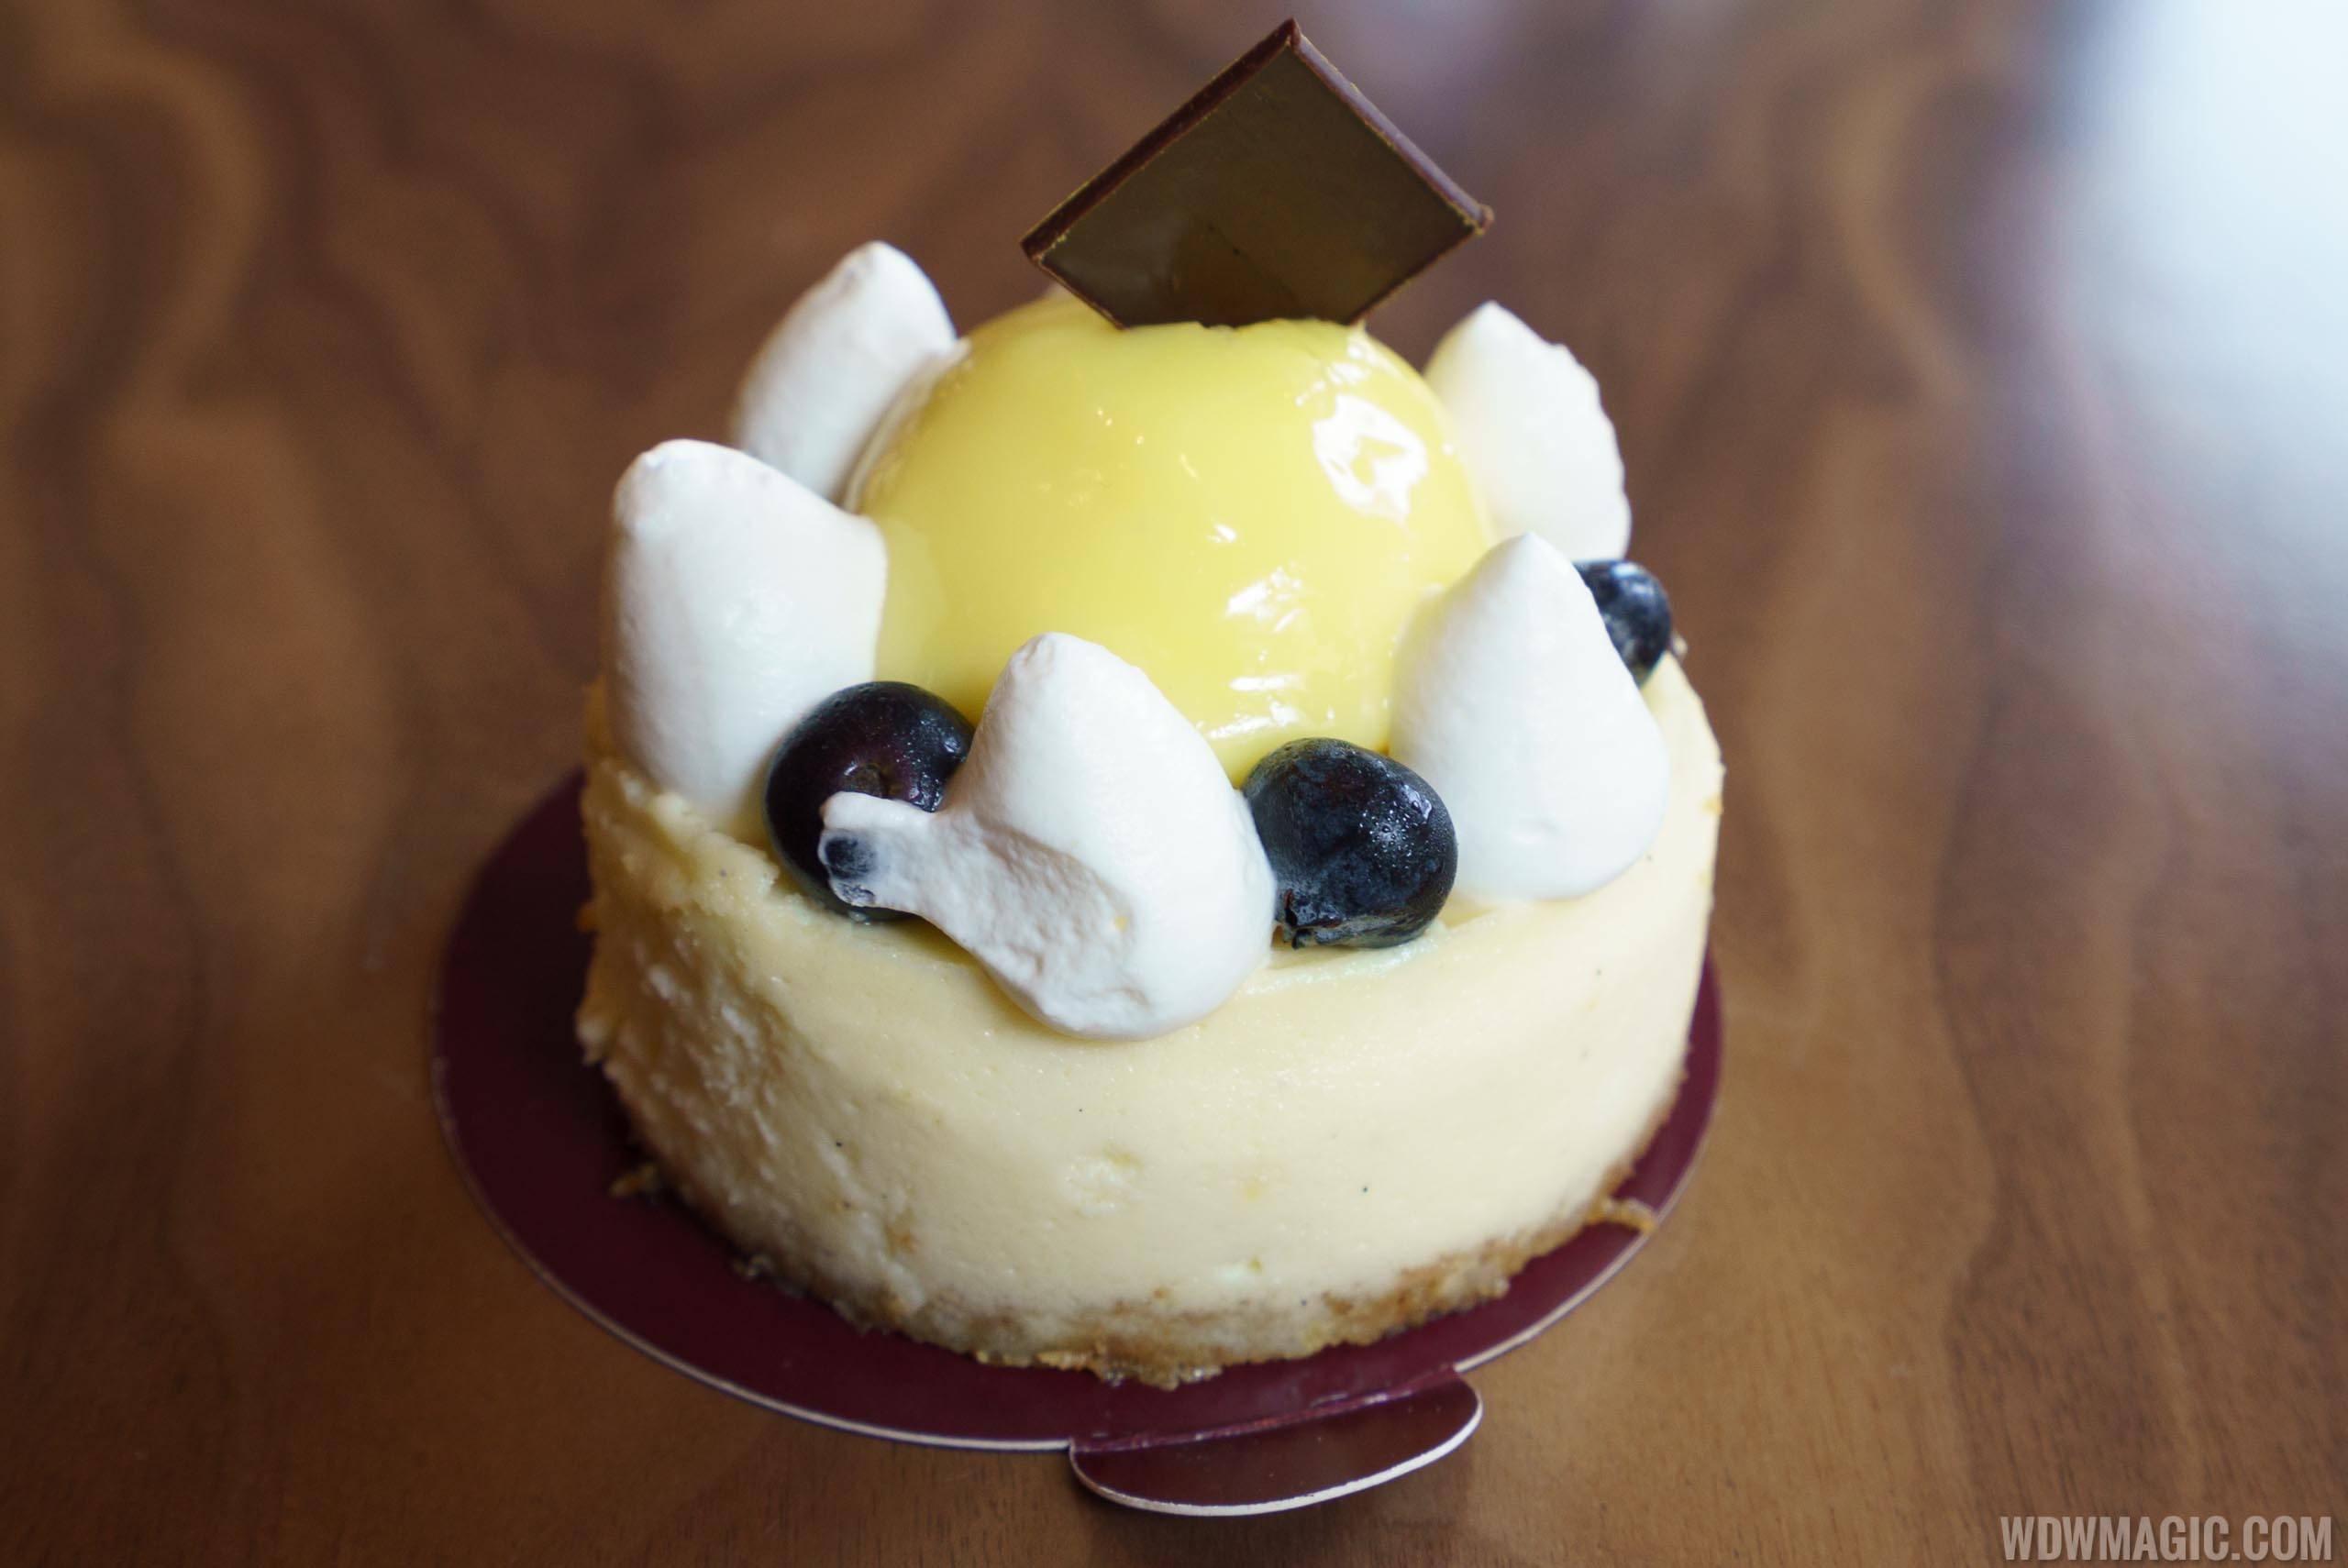 Amorette's Patisserie - 49th and Broadway/N.Y. Cheesecake: Lemon Curd, Blueberries, and Chantilly 